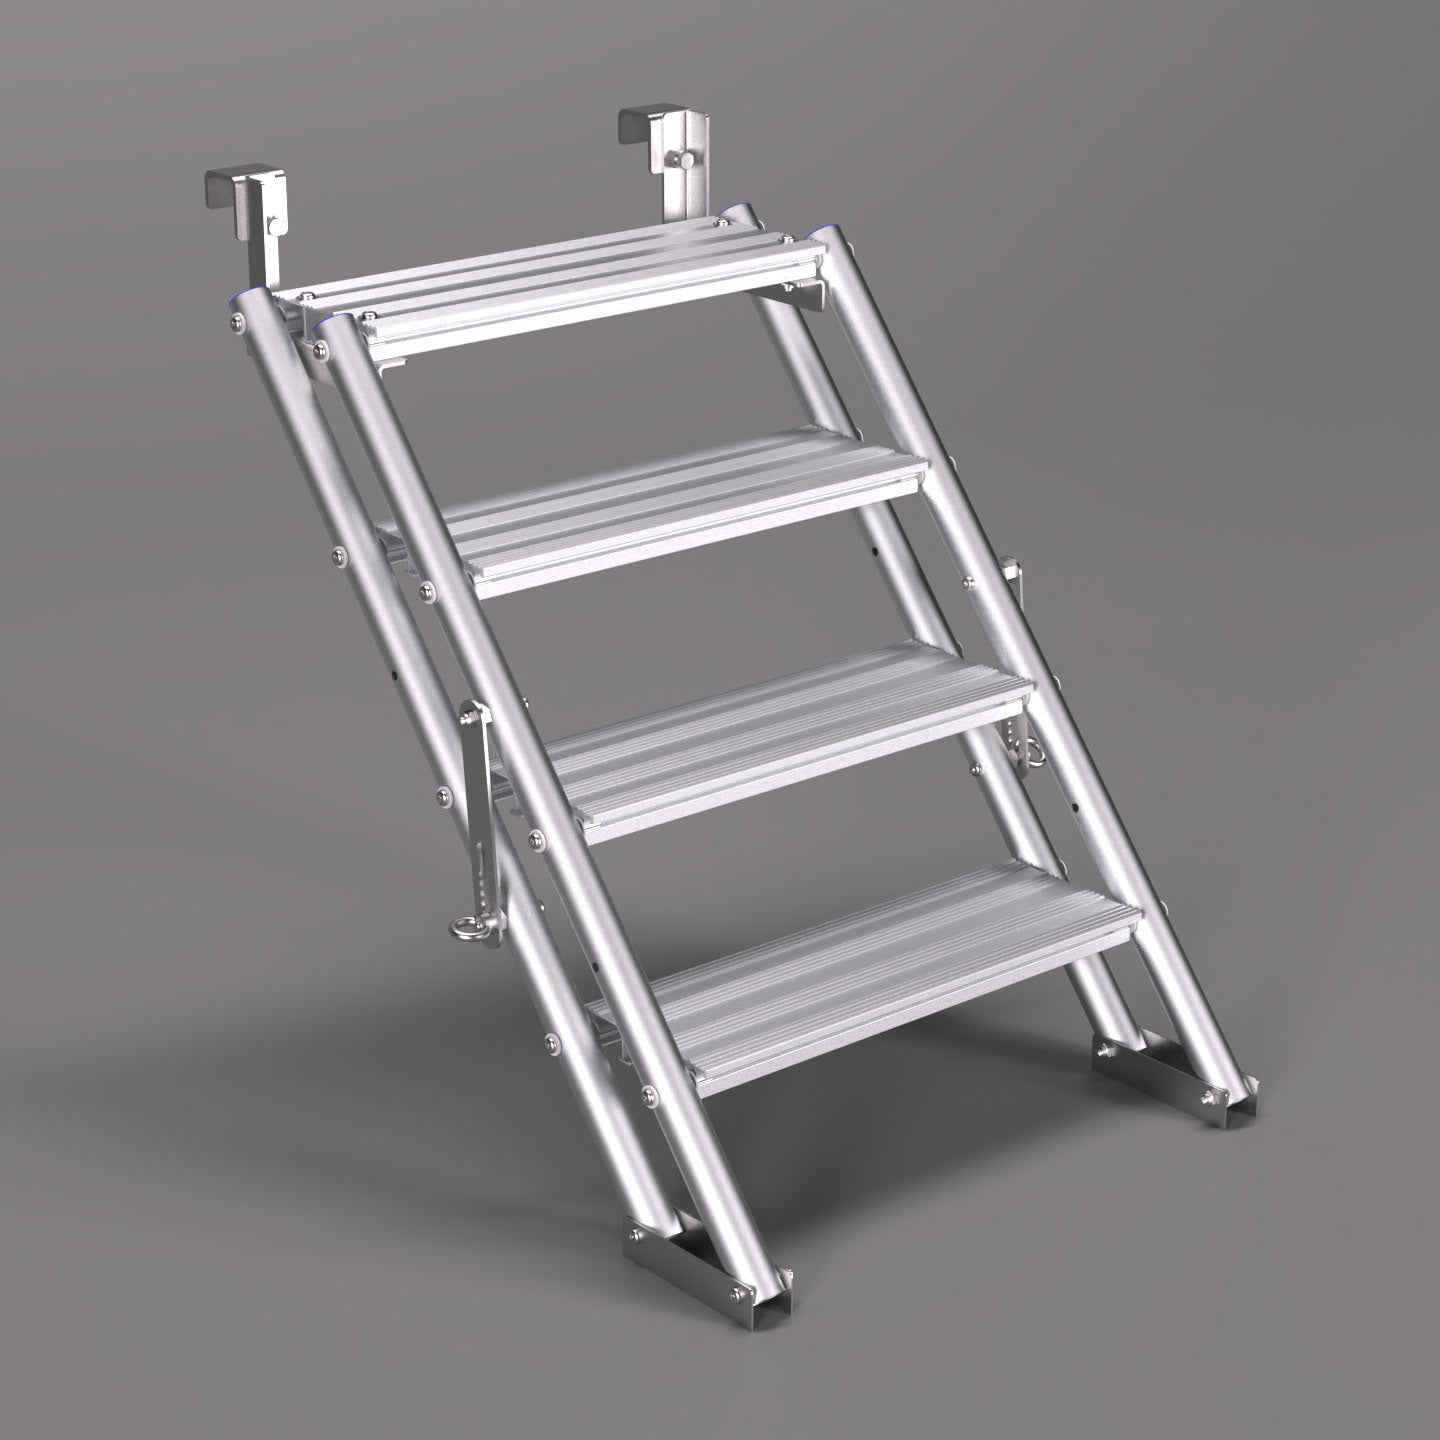 An image of a 1.0m ALTO Universal Stair Unit with the scaffold tube hook option.